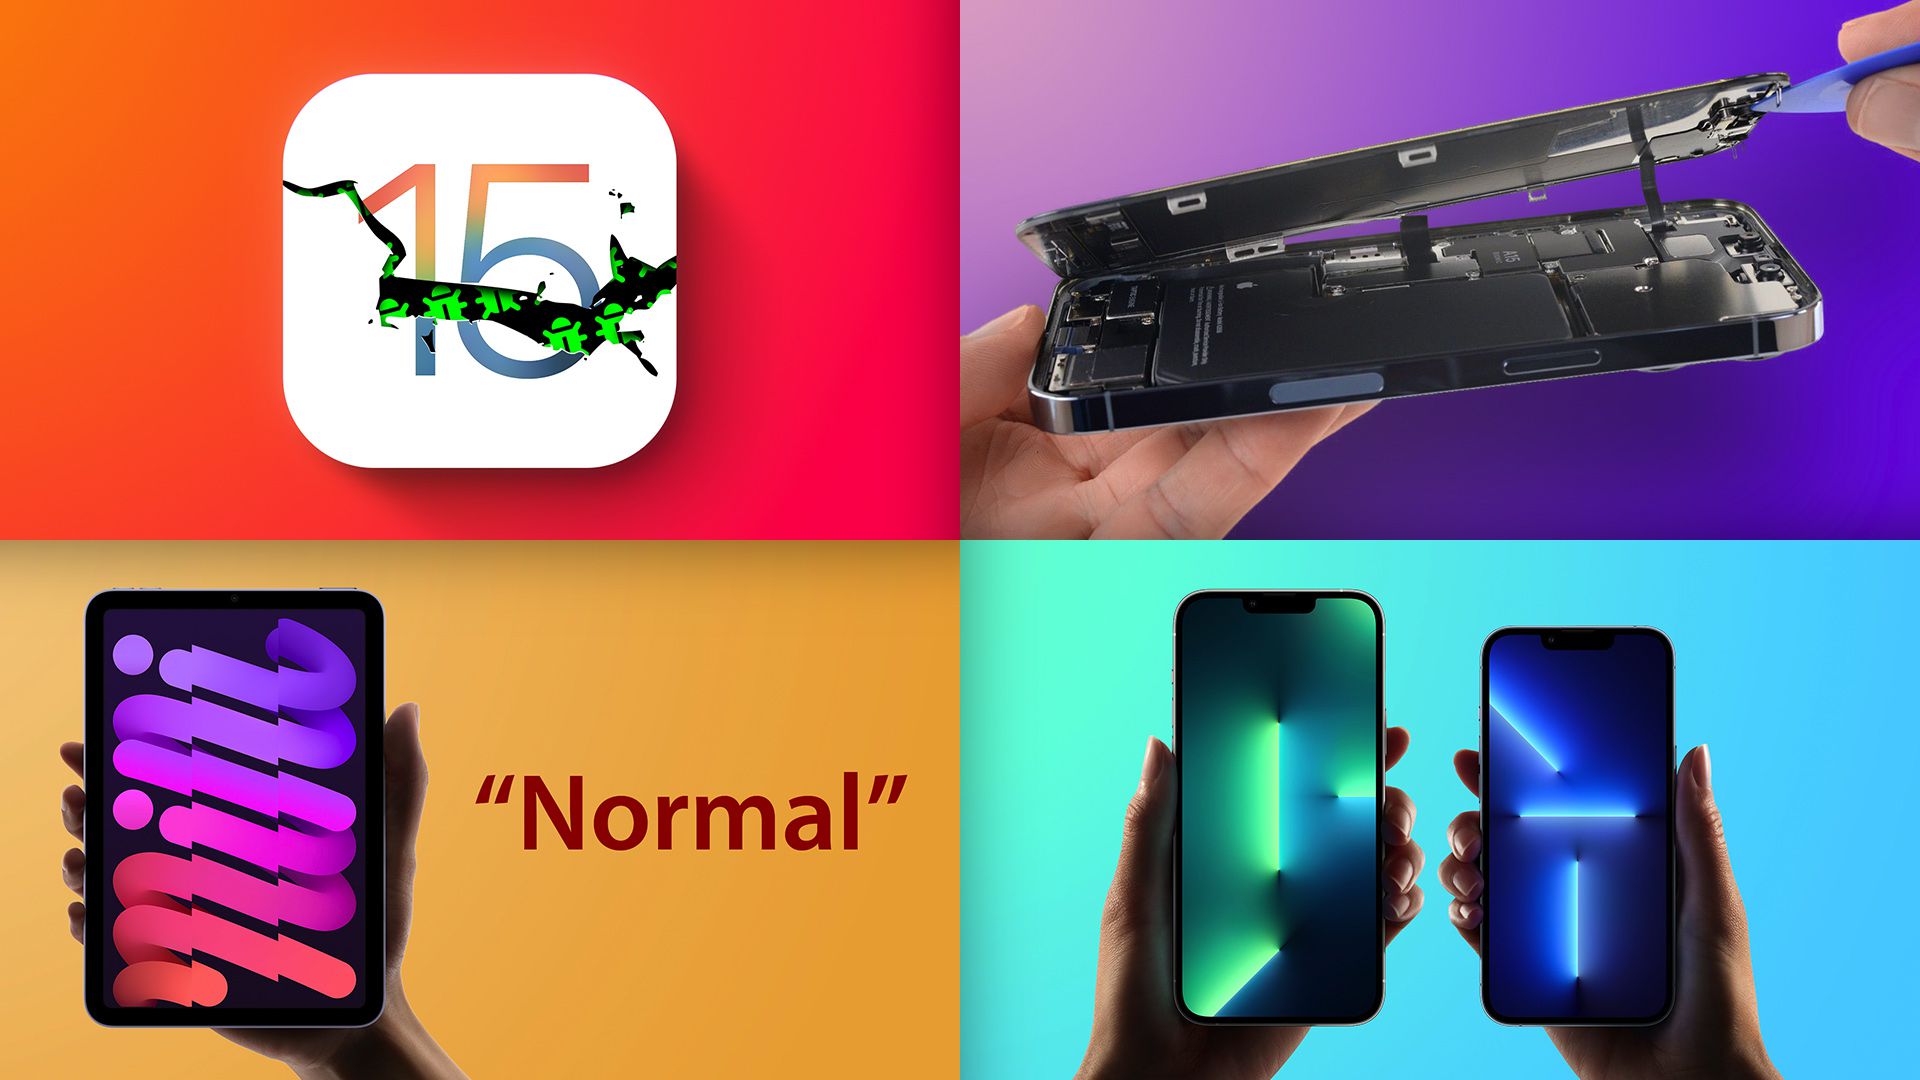 Top Stories: iOS 15 Bugs, iPhone 13 Teardowns, iPad Mini Jelly Scrolling, and More